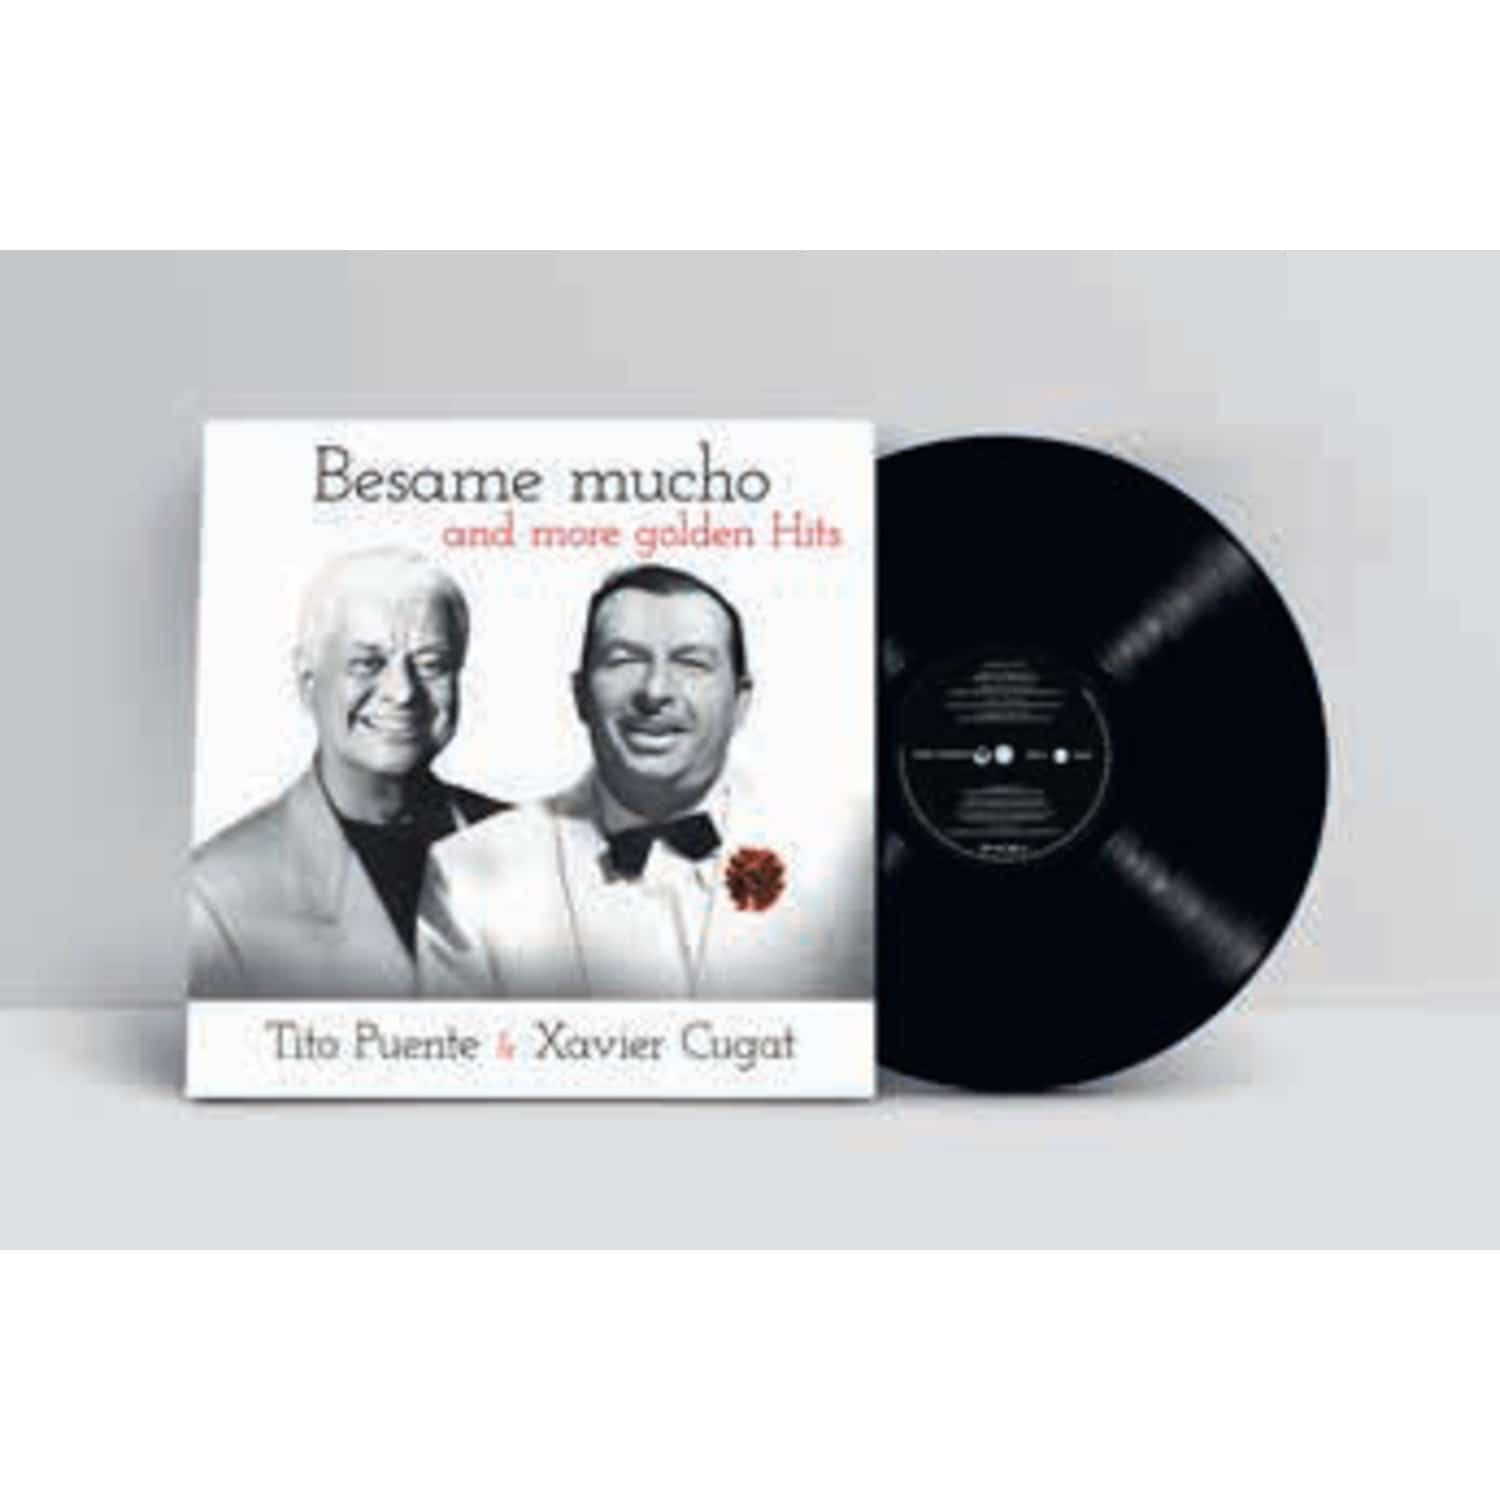 Xavier Cugat & Tito Puente - BESAME MUCHO AND MORE GOLDEN HITS 